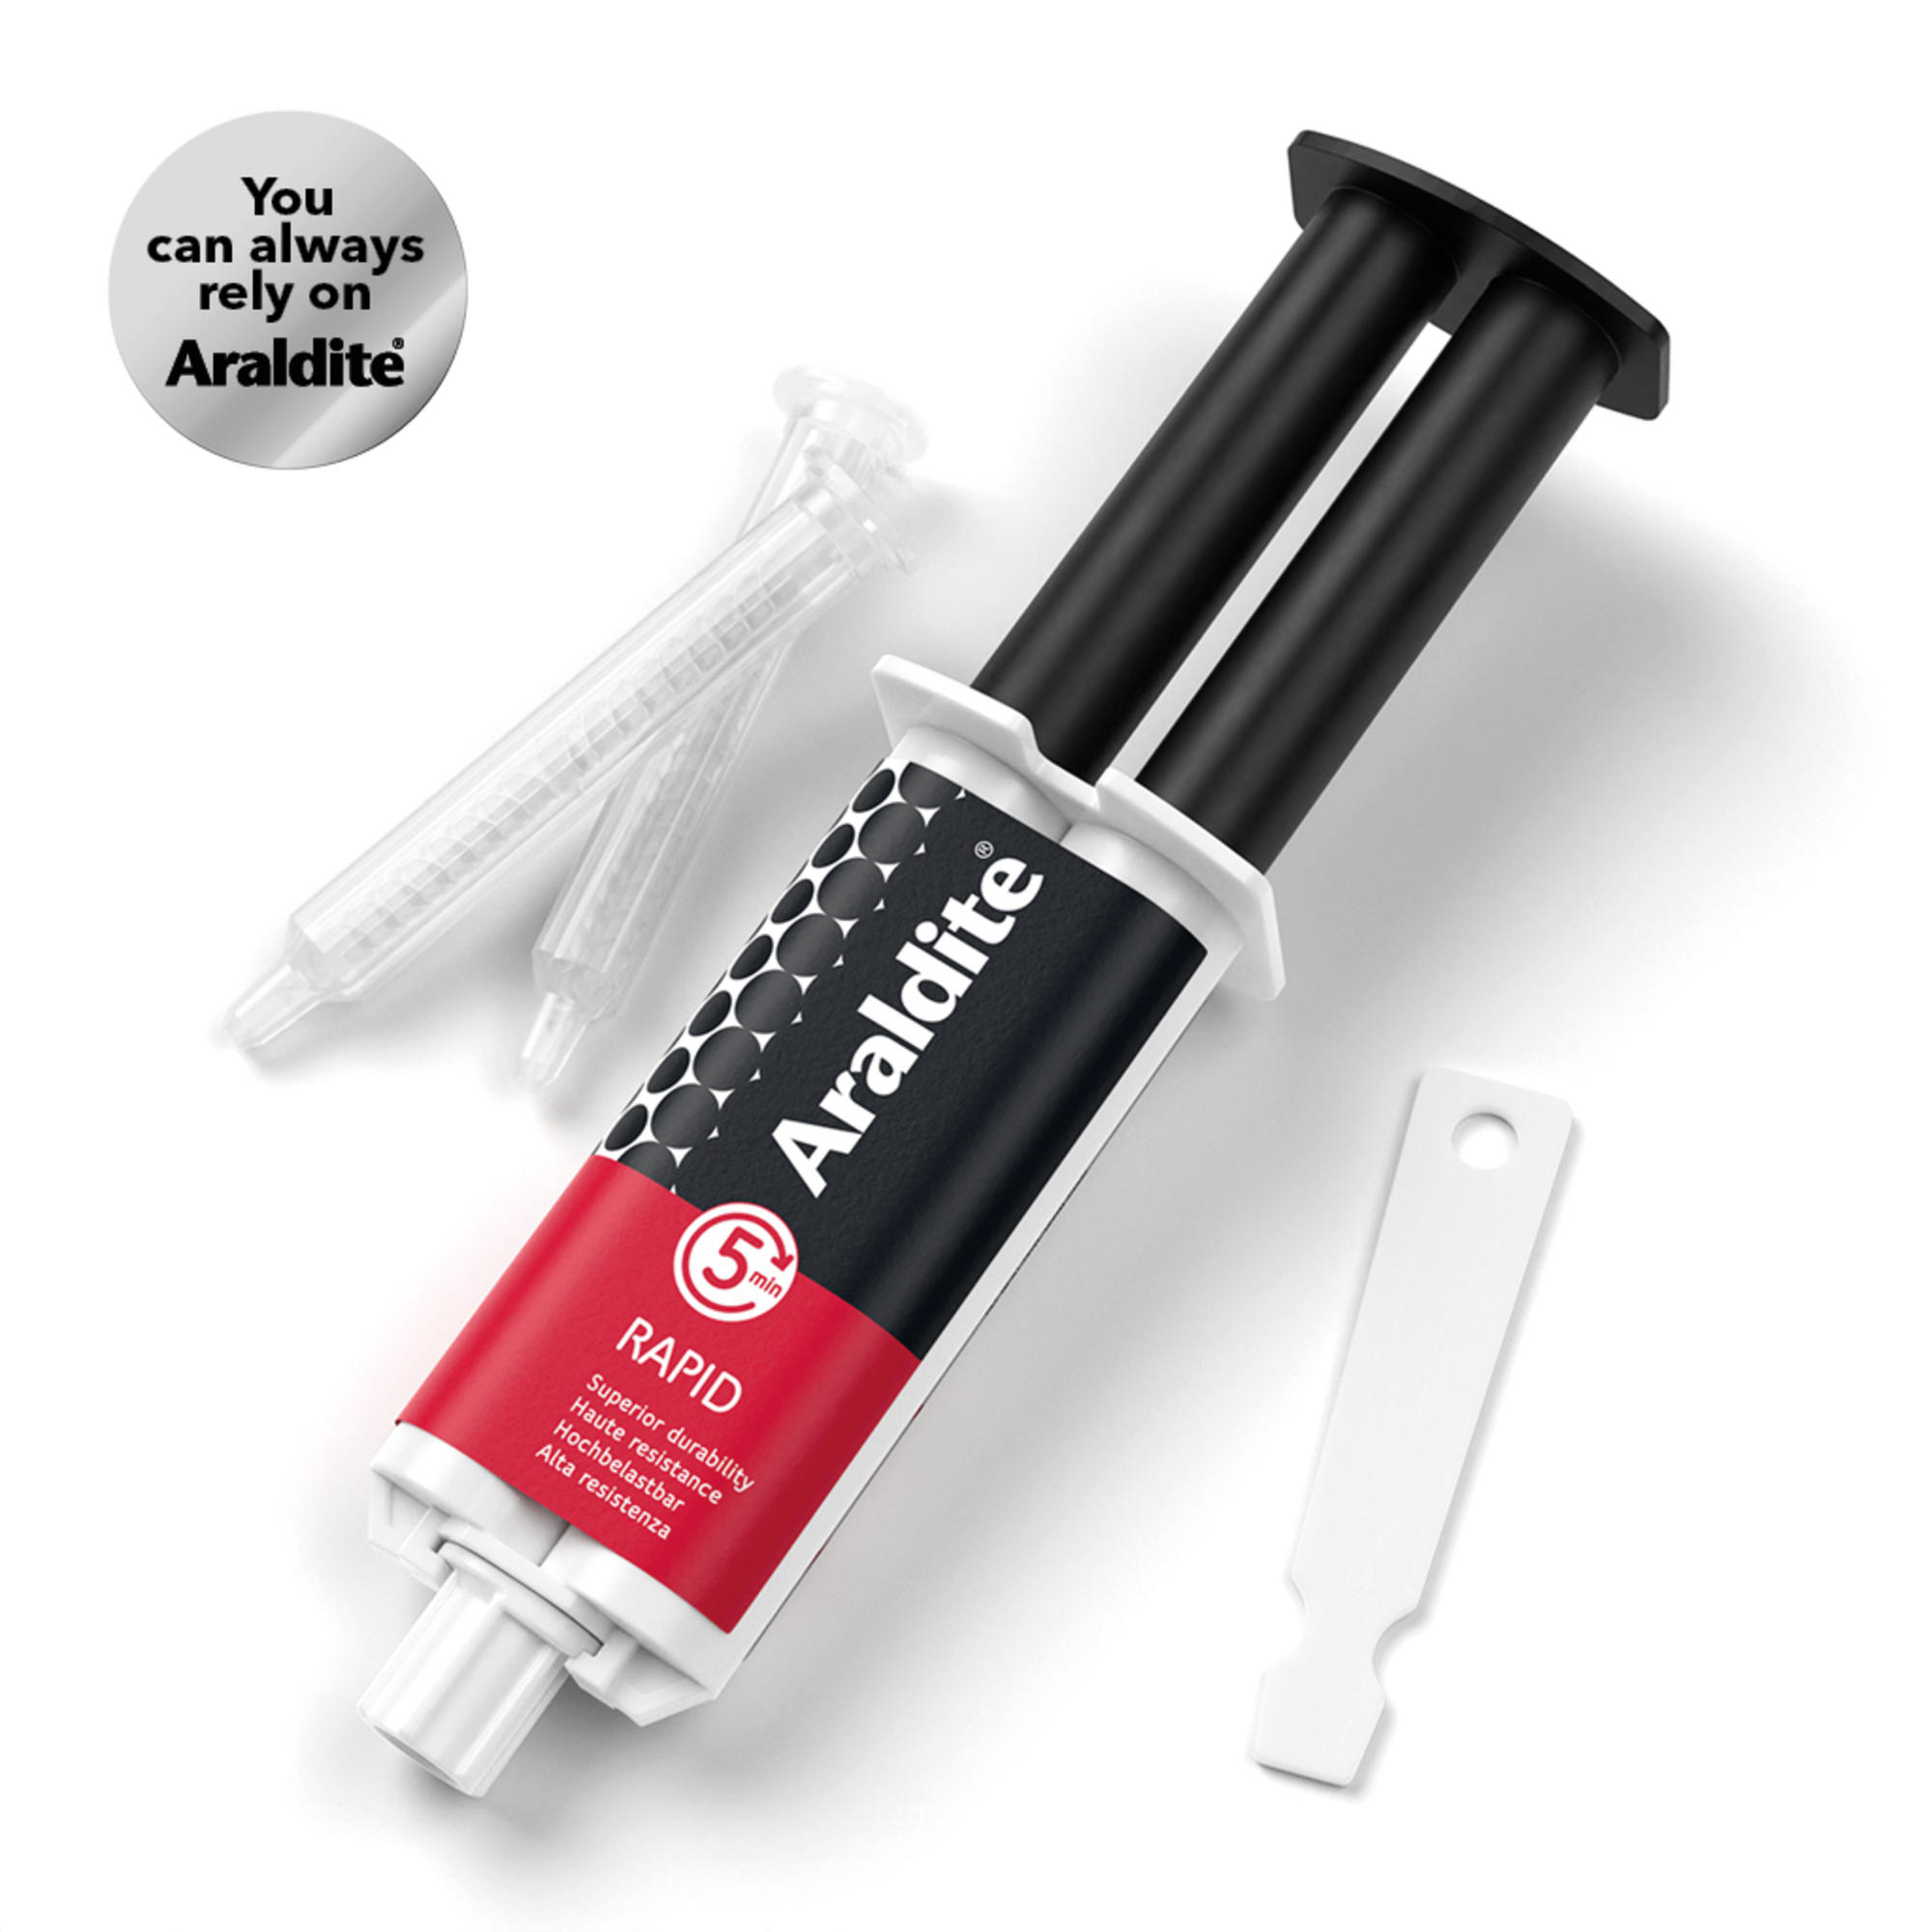 Araldite Standard Heavy Duty Adhesive | Ultra Strong Epoxy Glue |  Solvent-Free Professional Grade Strength for All Materials | Slow Cure for  Bonding